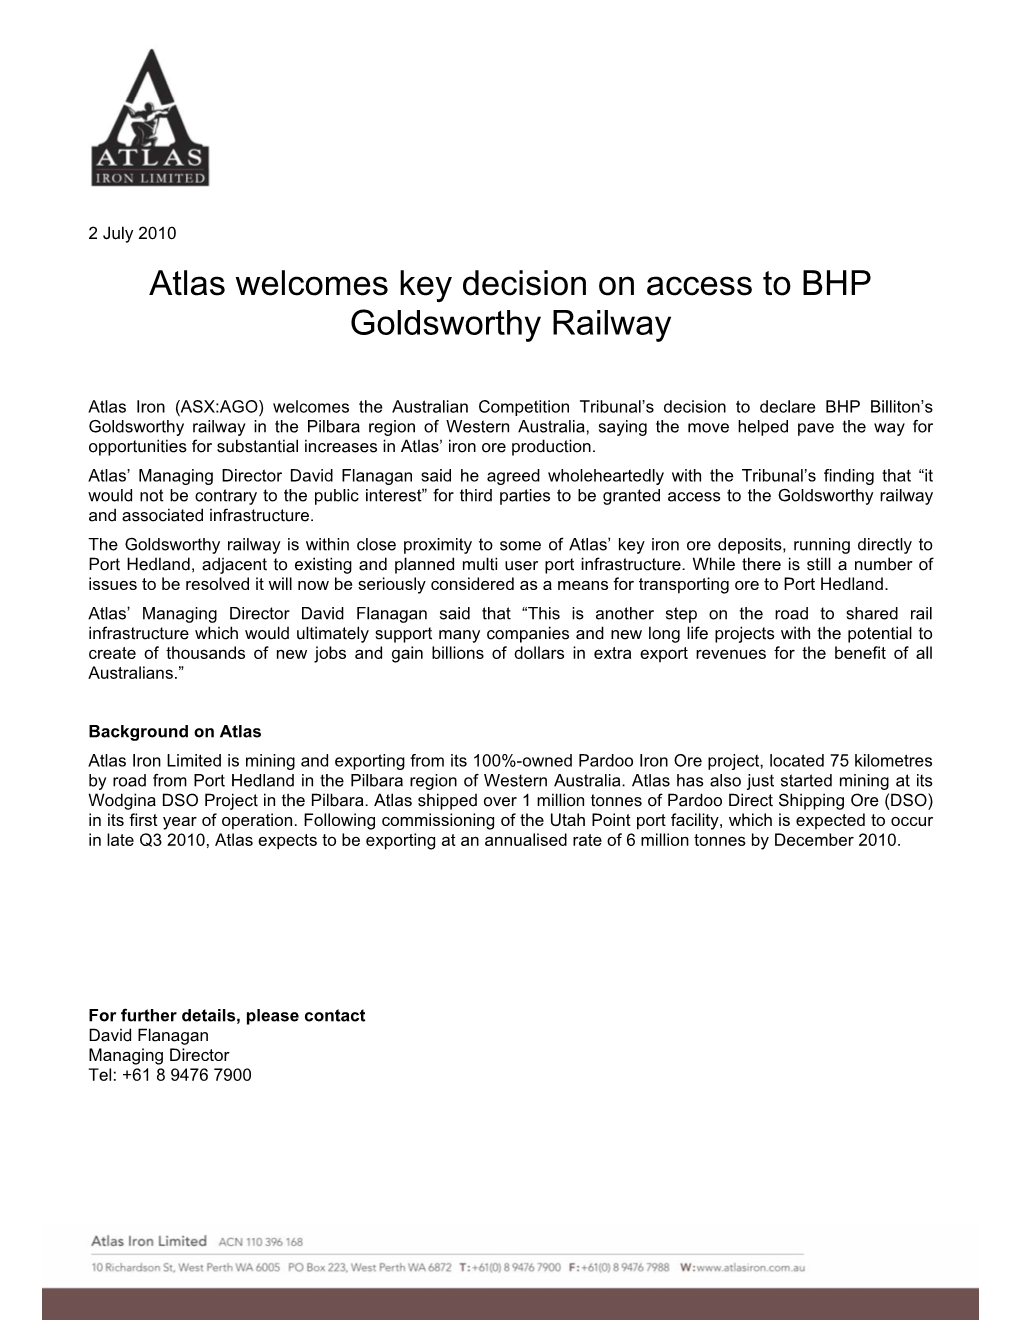 Atlas Welcomes Key Decision on Access to BHP Goldsworthy Railway